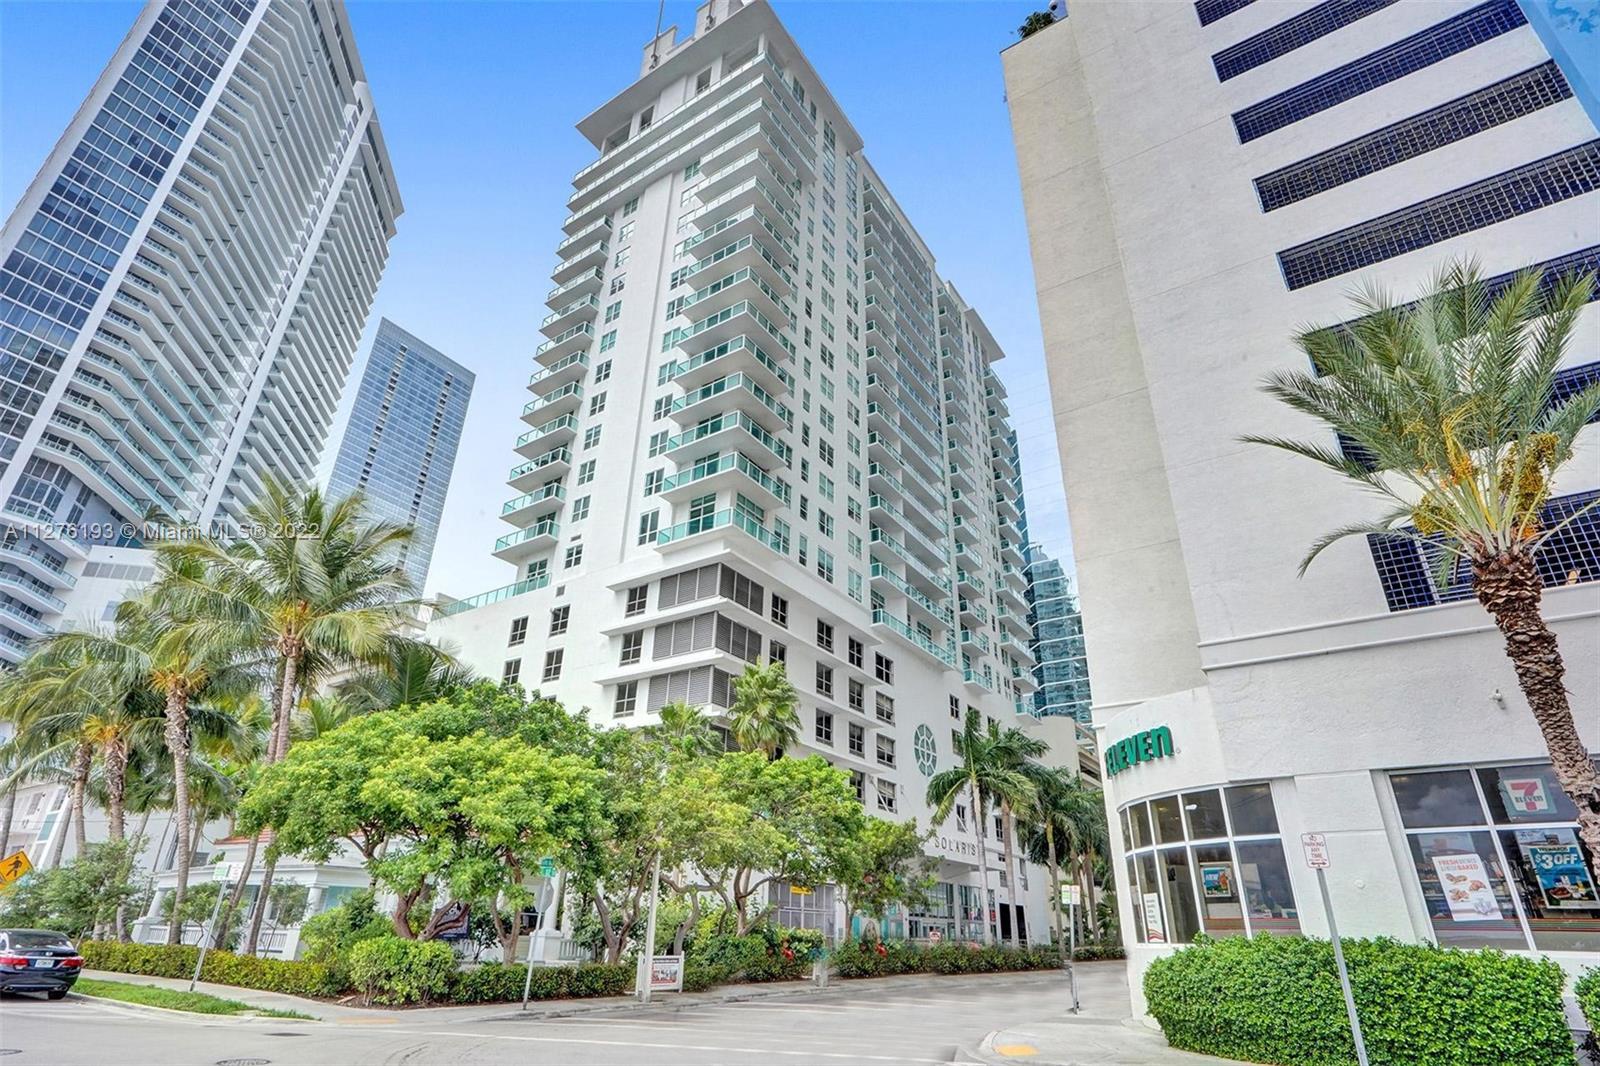 LOVE THIS BRIGHT AND SPACIOUS 2/2 CORNER UNIT WITH 9FT FLOOR TO CEILING WINDOWS/DOORS, TRAVERTINE TILE FLOORS, SPLIT FLOOR PLAN, WRAP AROUND GLASS PANEL BALCONY WITH VIEWS TO THE BAY AND BRICKELL CITY. THE OPEN KITCHEN FEATURES GE PROFILE APPLIANCES AND GRANITE COUNTERTOPS. FULL SIZE W/D, STORAGE, AND LARGE CLOSETS IN BEDROOMS. THE SOLARIS AT BRICKELL BAY OFFERS WORLD CLASS AMENITIES INCLUDING FITNESS CTR, SAUNA, CLUBROOM, AMAZON PACKAGE STATION, VALET PARKING, 24 HR SECURITY AND IT’S PET FRIENDLY! BUYER PAYS ASSESSMENT $199.00/MO PAID THROUGH APRIL 1, 2030.